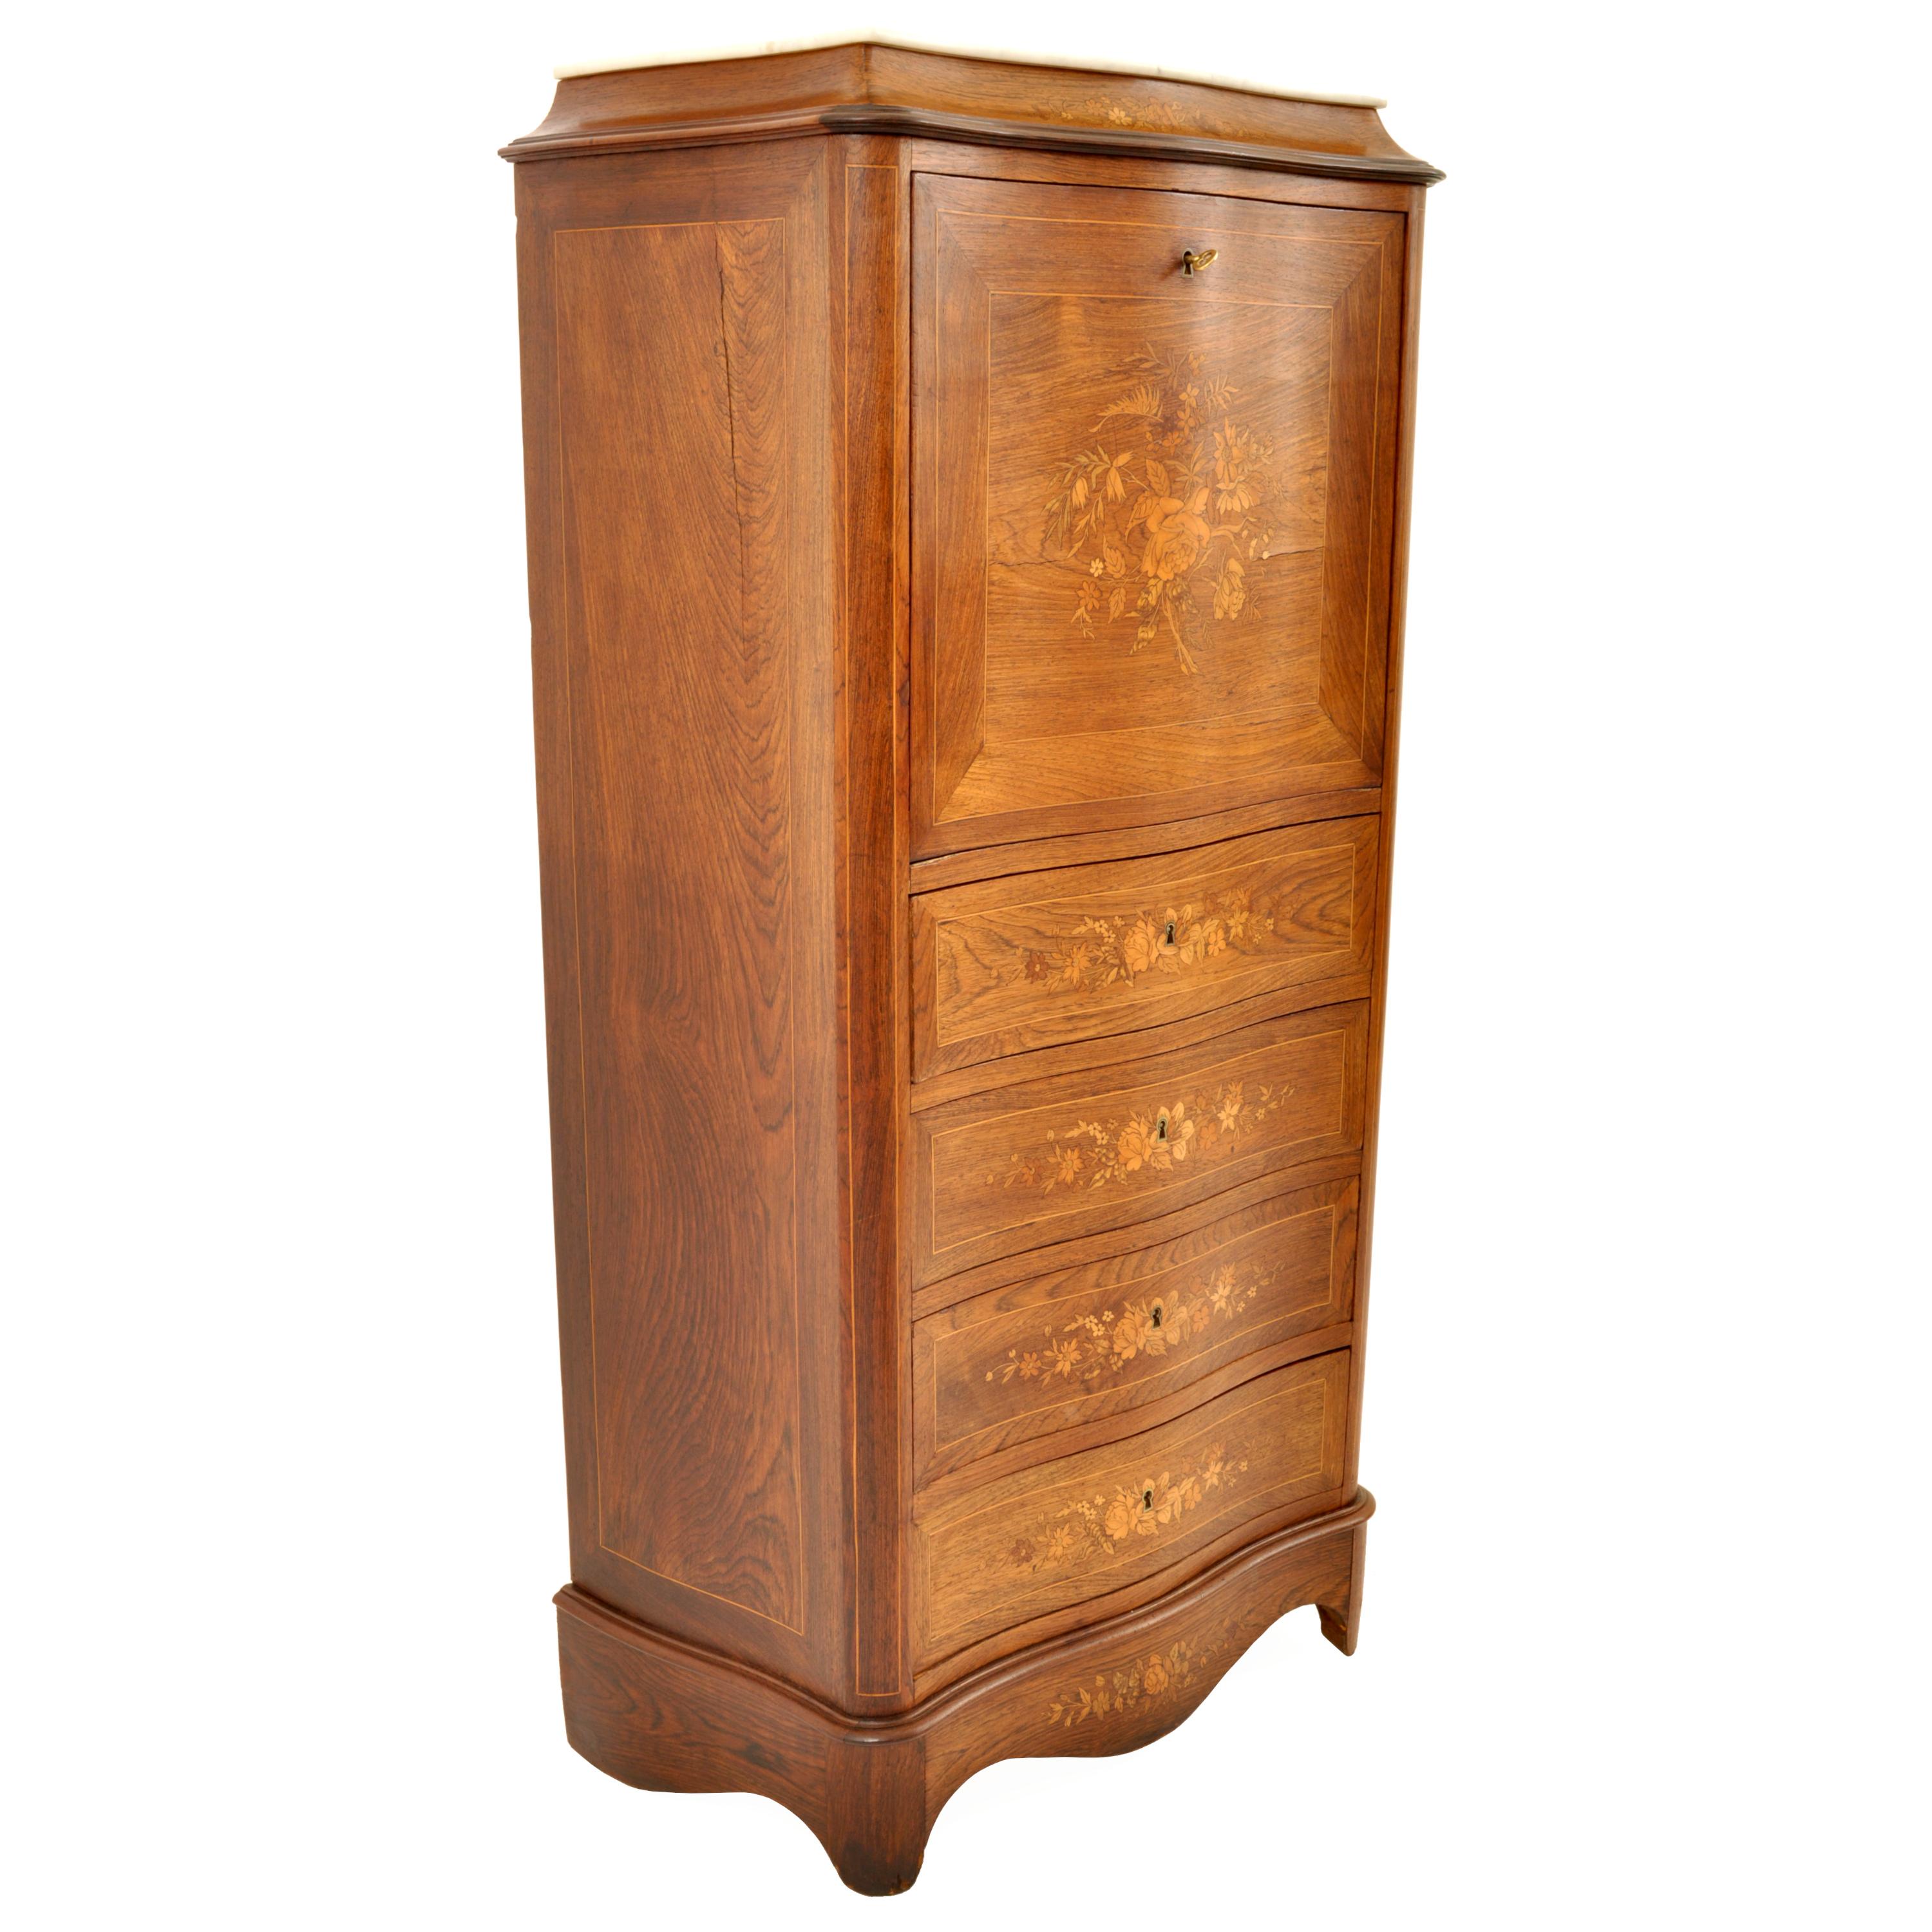 Antique French Louis XVI Inlaid Rosewood Secretaire Abattant Desk Dresser, 1880 In Good Condition For Sale In Portland, OR